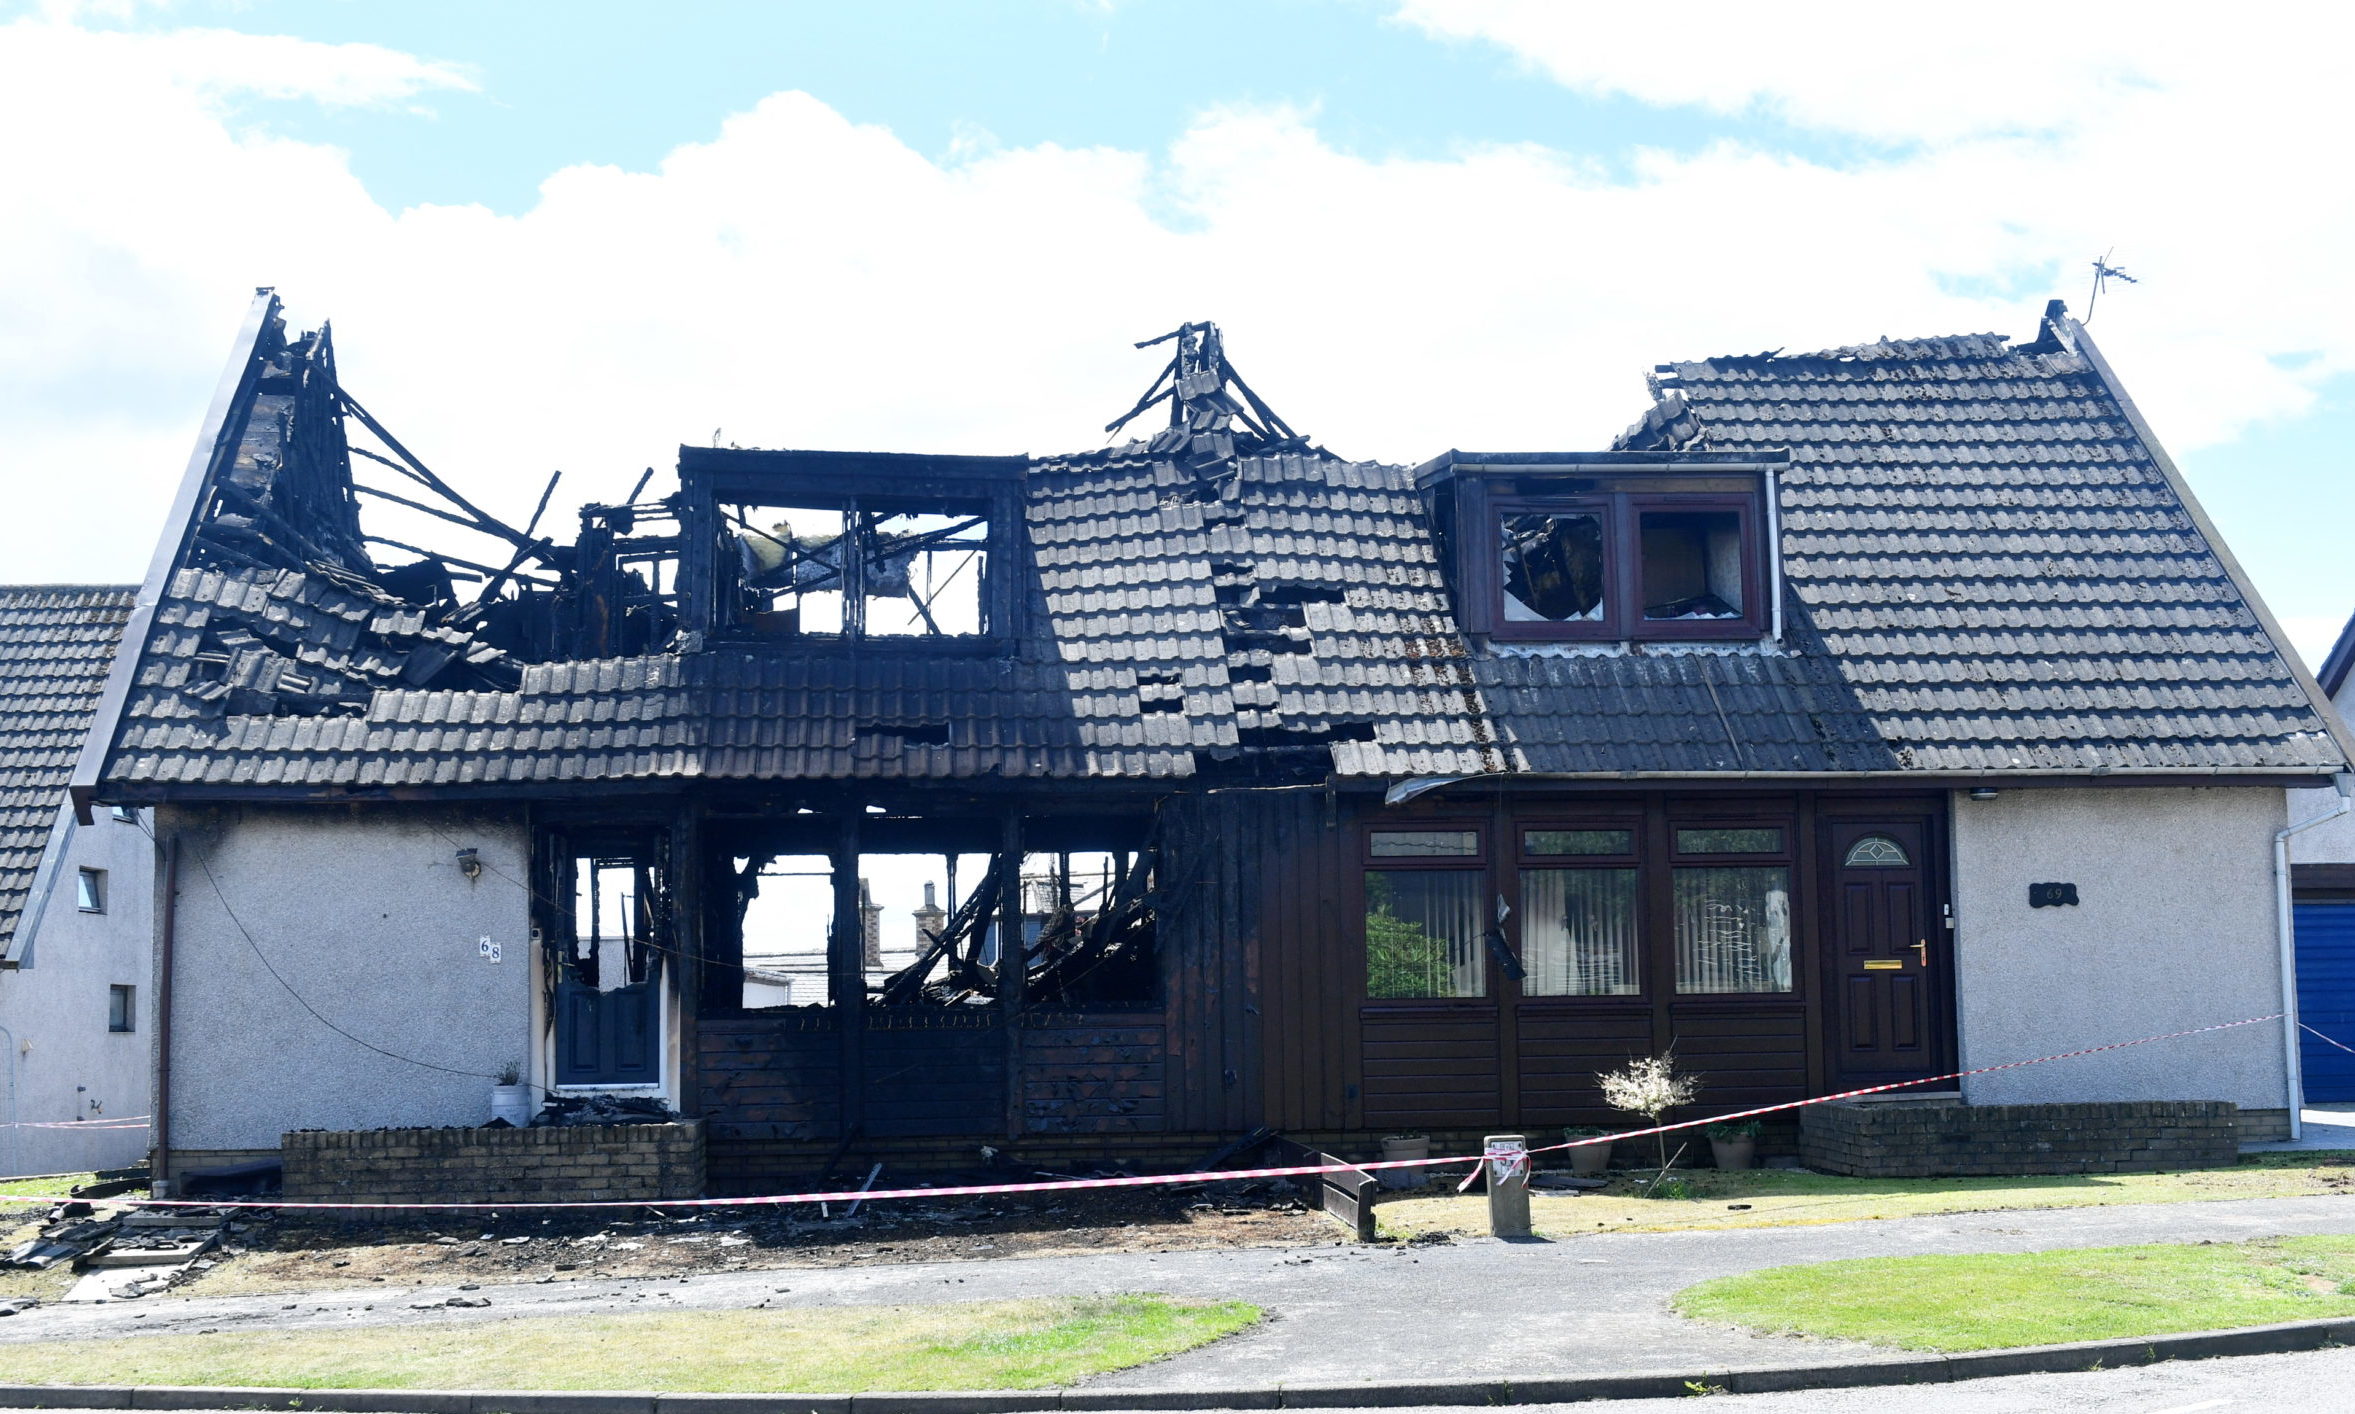 The house in Invergarry Park was badly damaged by a fire. Picture by Chris Sumner.